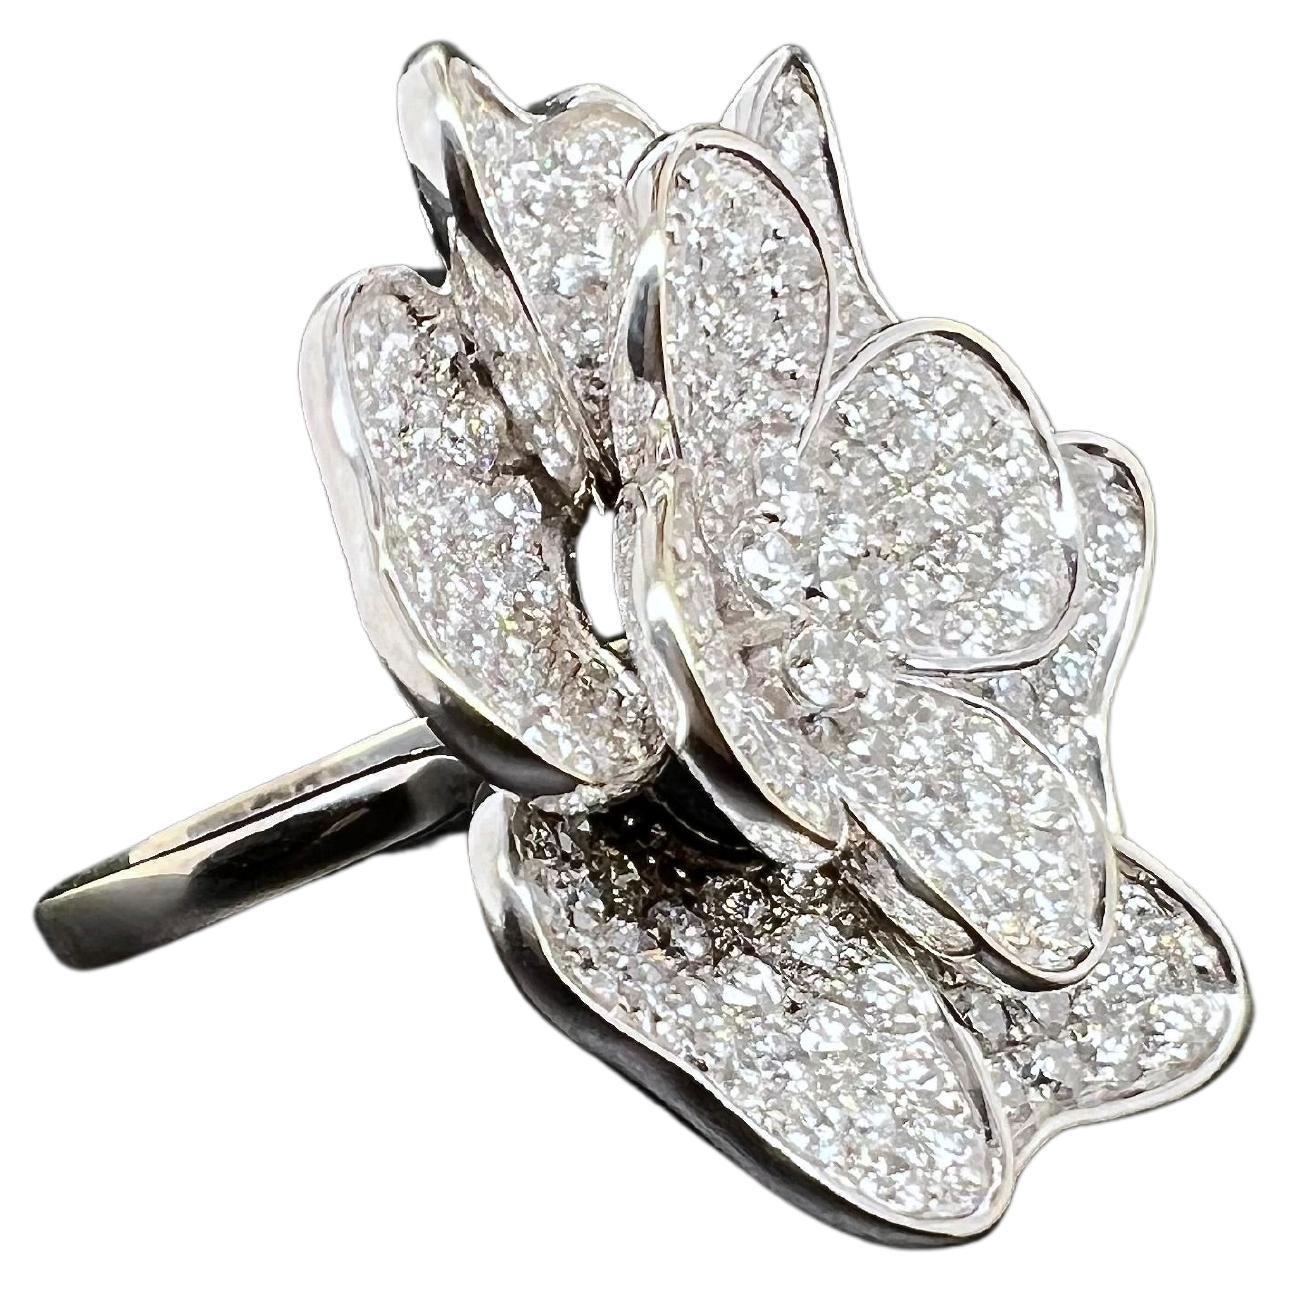 This whimsical ring is absolutely gorgeous and perfect to wear for luncheons and events! The 18k white gold setting houses the floral pattern encrusted with round brilliant diamonds on the petals. The large top floral petals makes its stand out